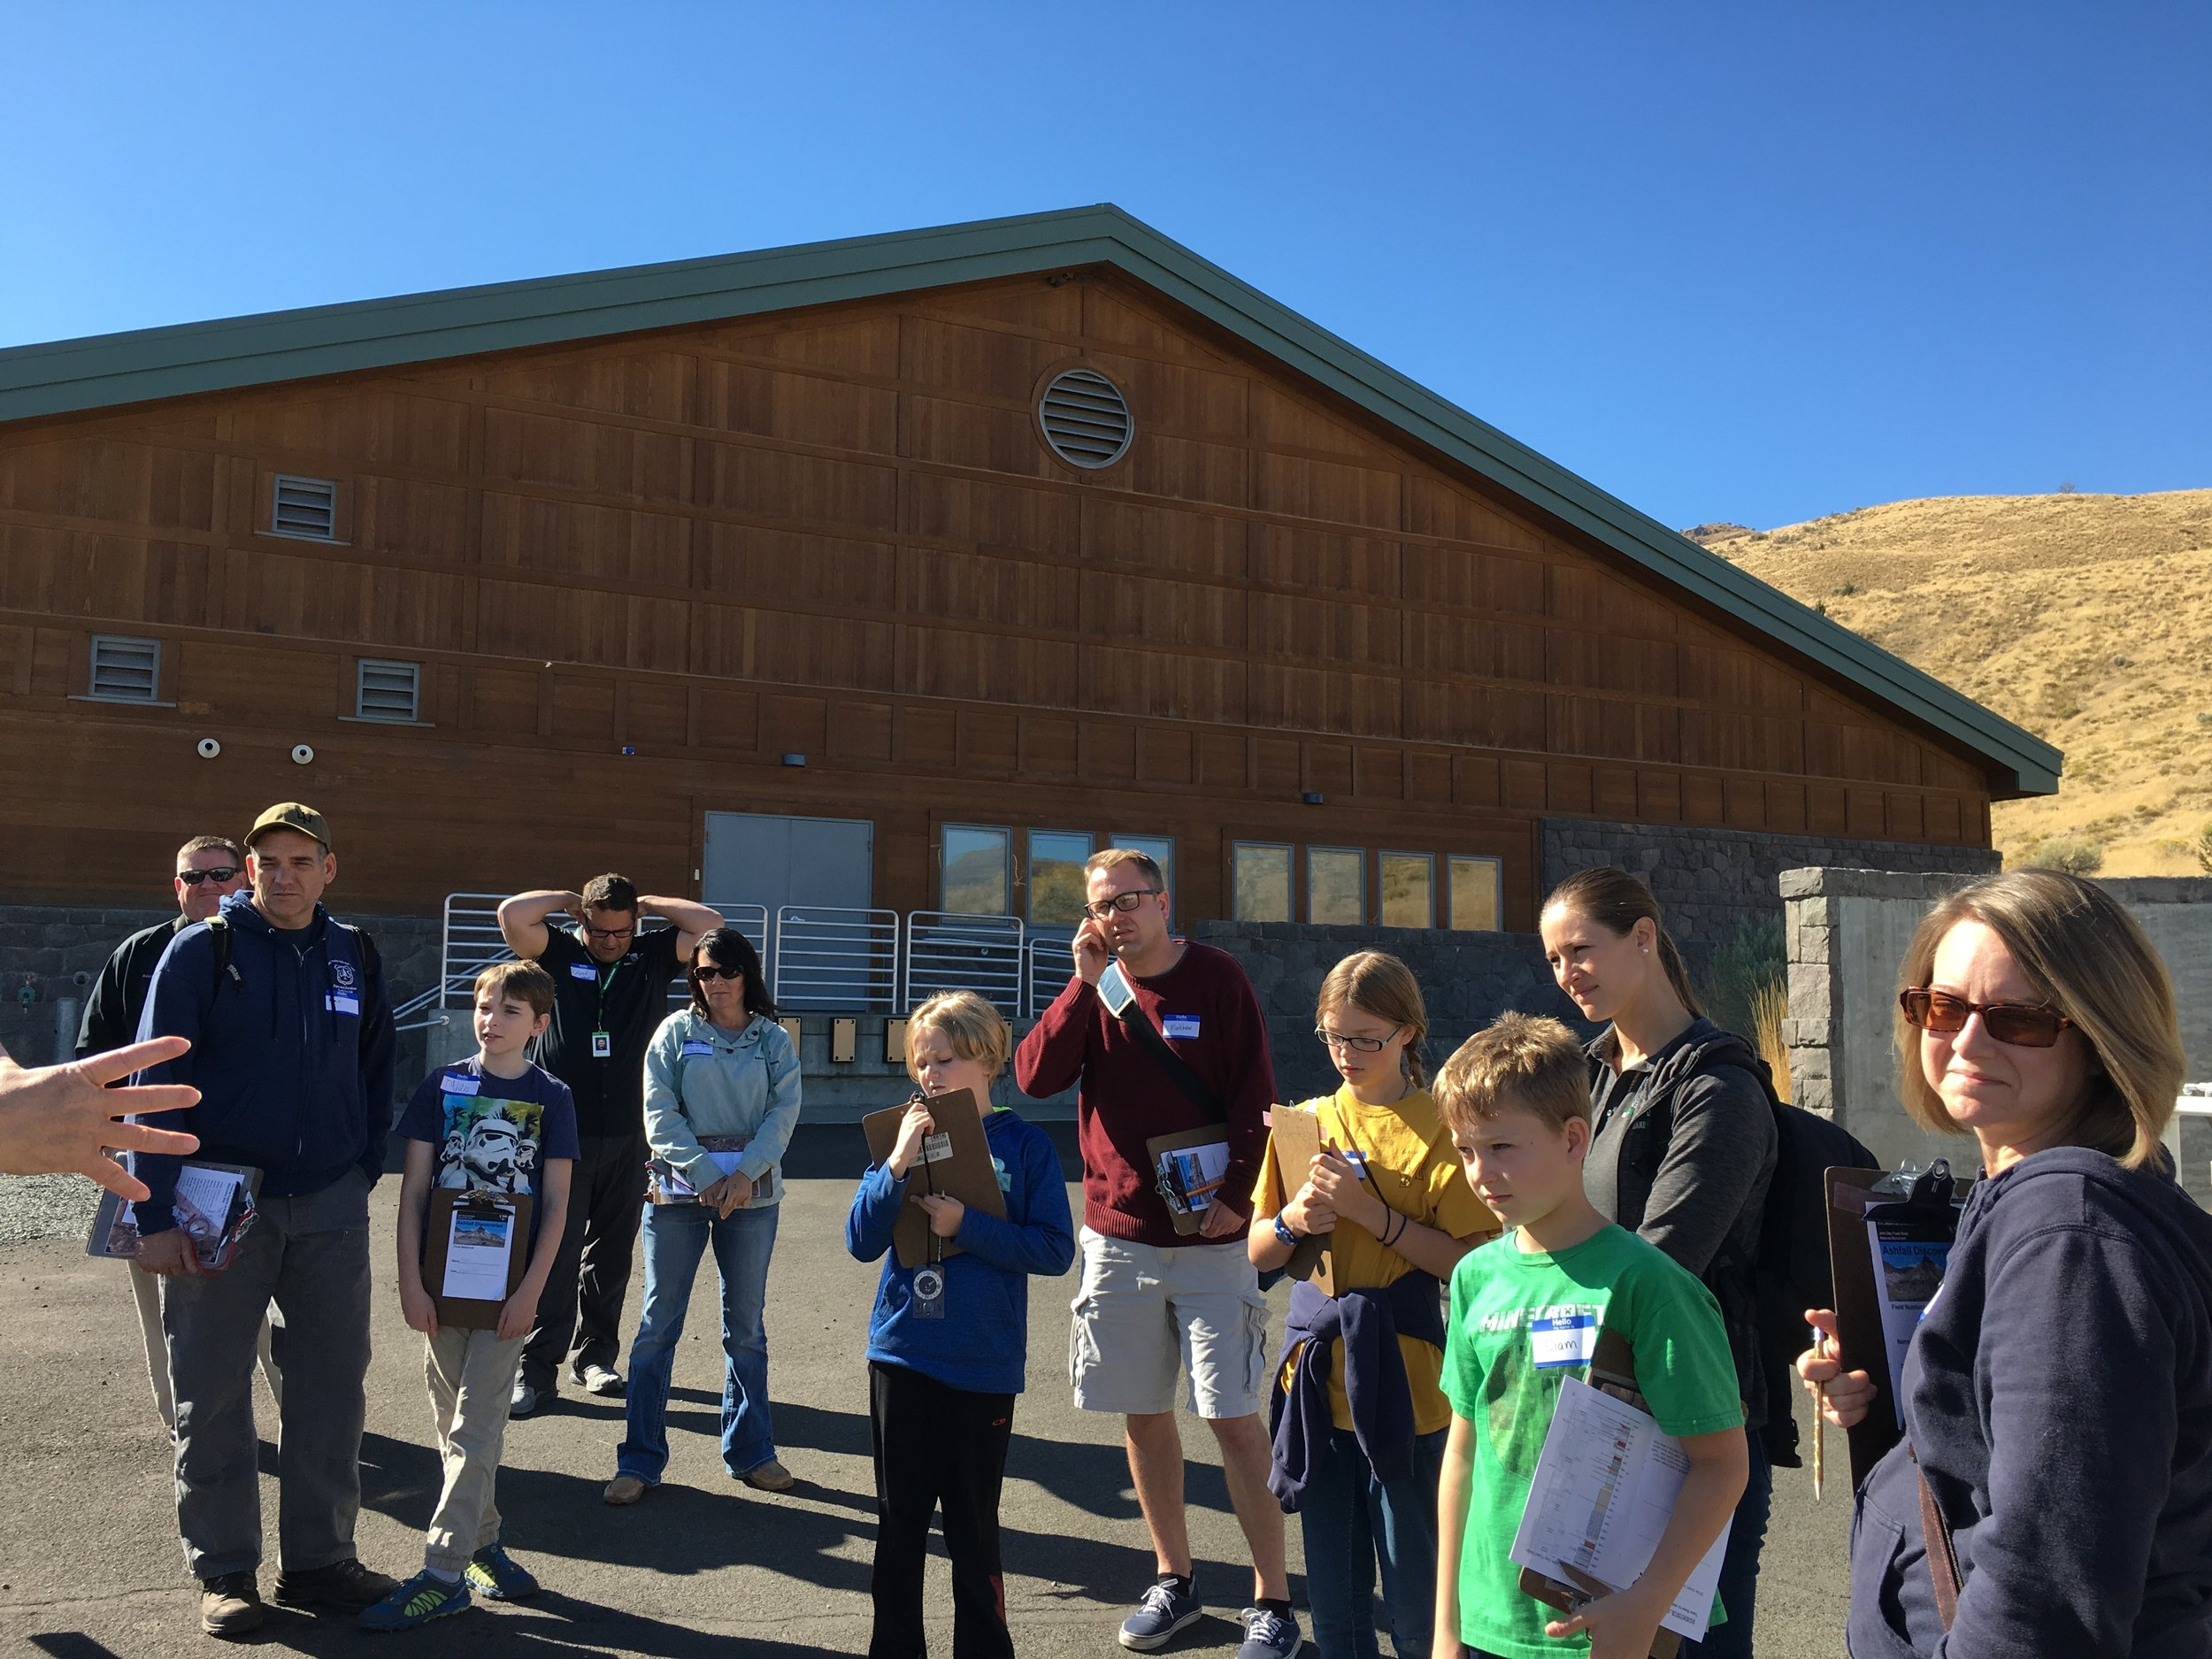 The John Day Fossil Beds Visitor's Center